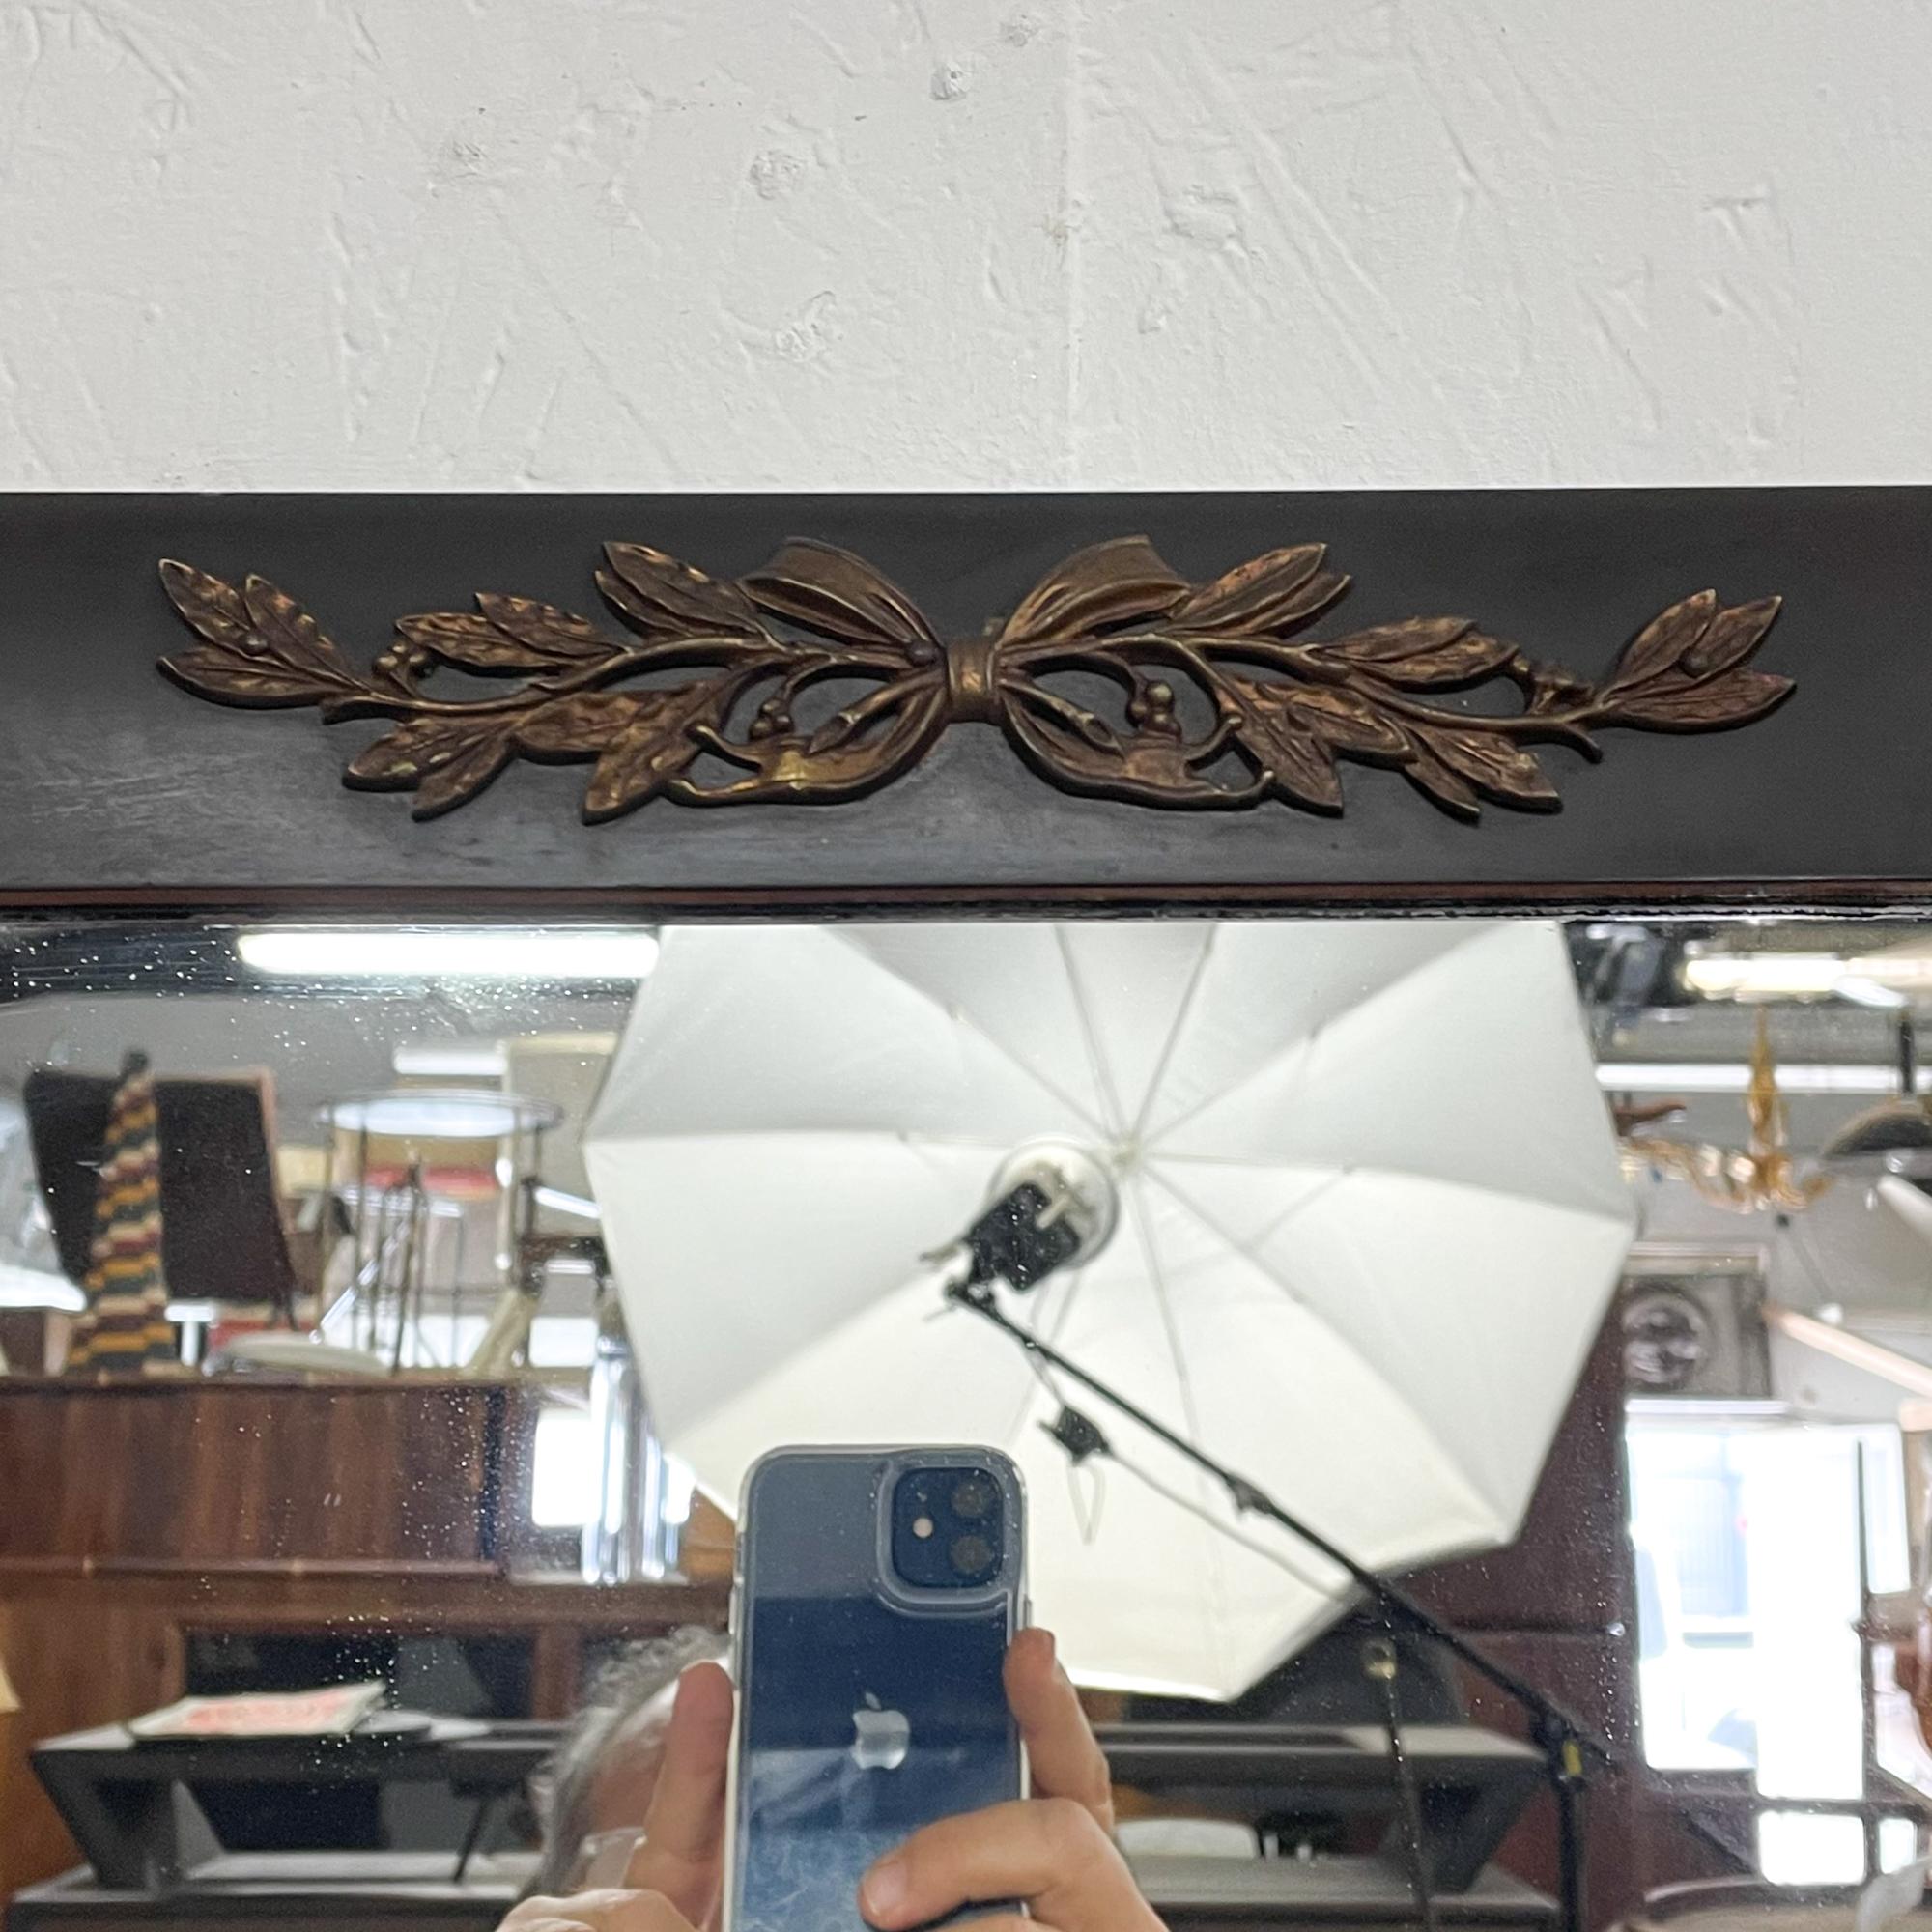 1940s Neoclassical wall mirror designed and manufactured by Landstrom furniture of Rockford, Illinois. 
Wood frame with sculptural lines and classical brass ornamentation. 
Made in the USA
Complete bed set is available ask dealer.
Wood and mirror